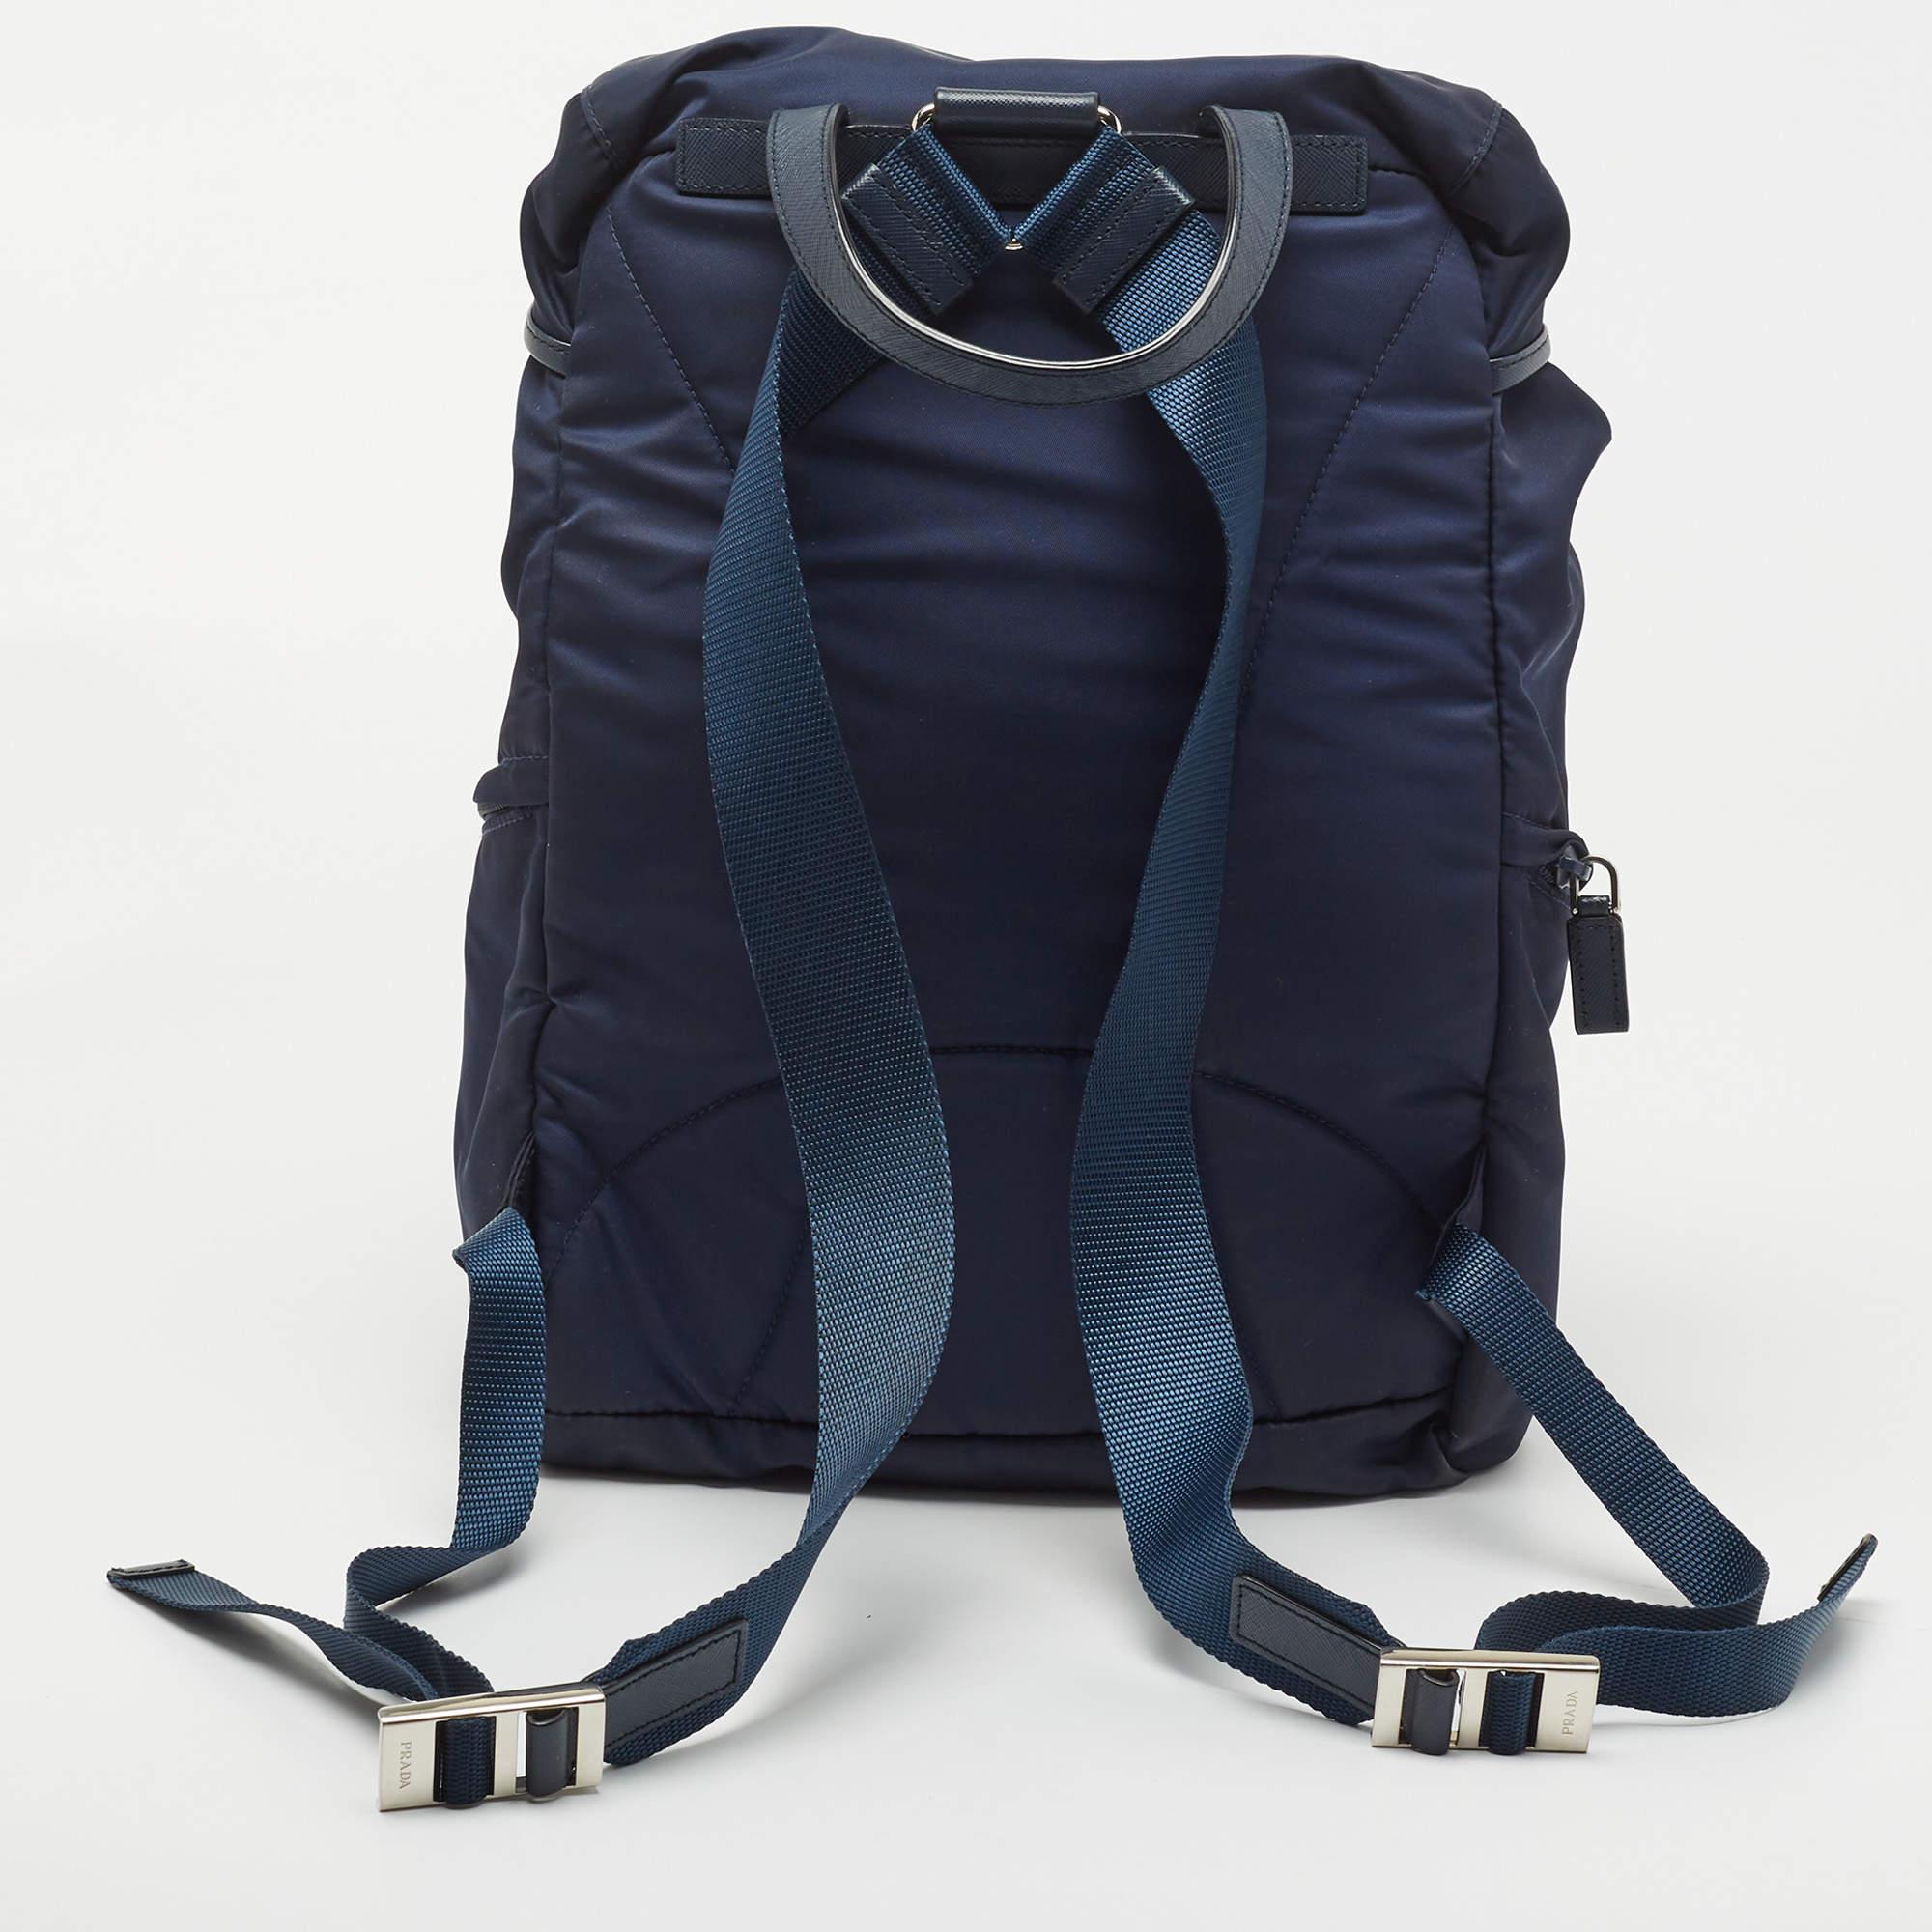 This backpack from Prada has been designed to be a worthy style companion! Crafted from nylon, the designer backpack for men features a spacious interior to carry your essentials in.

Includes: Original Dustbag, Authenticity Card, Invoice

